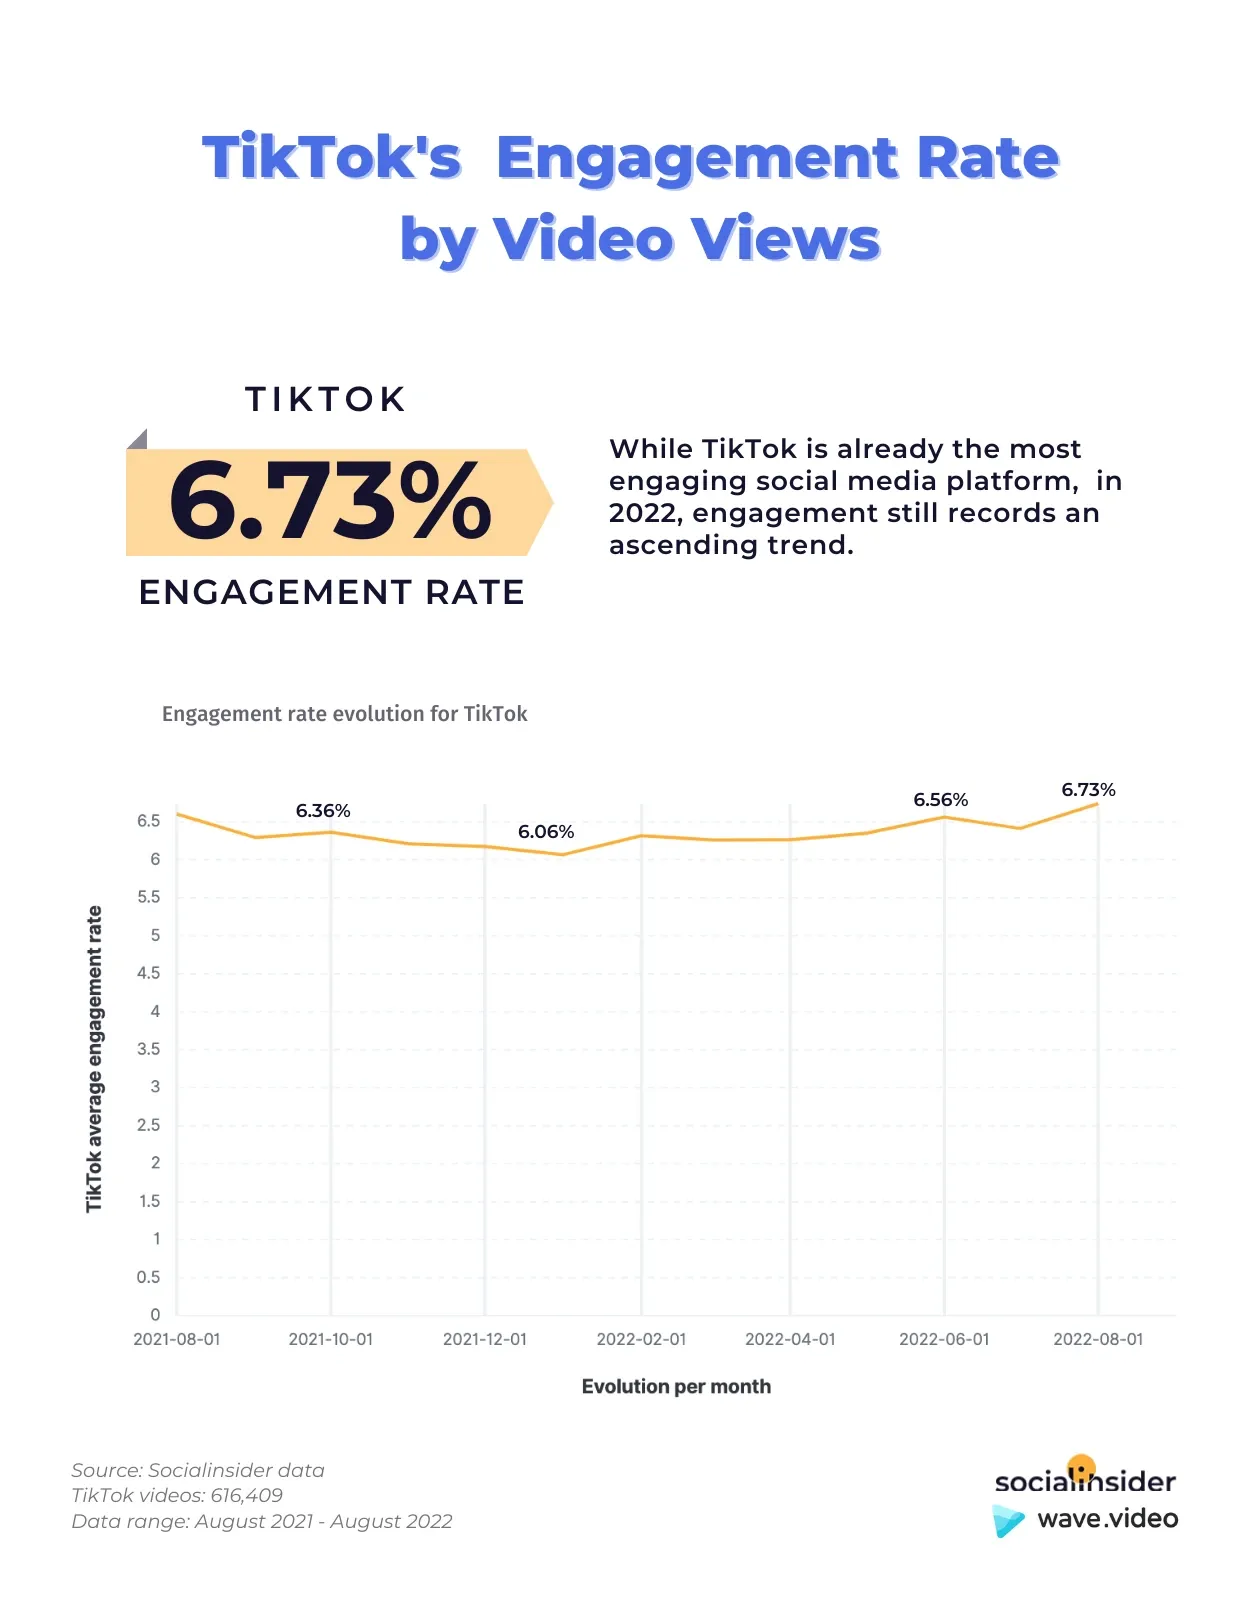 TikTok engagement rate by video views